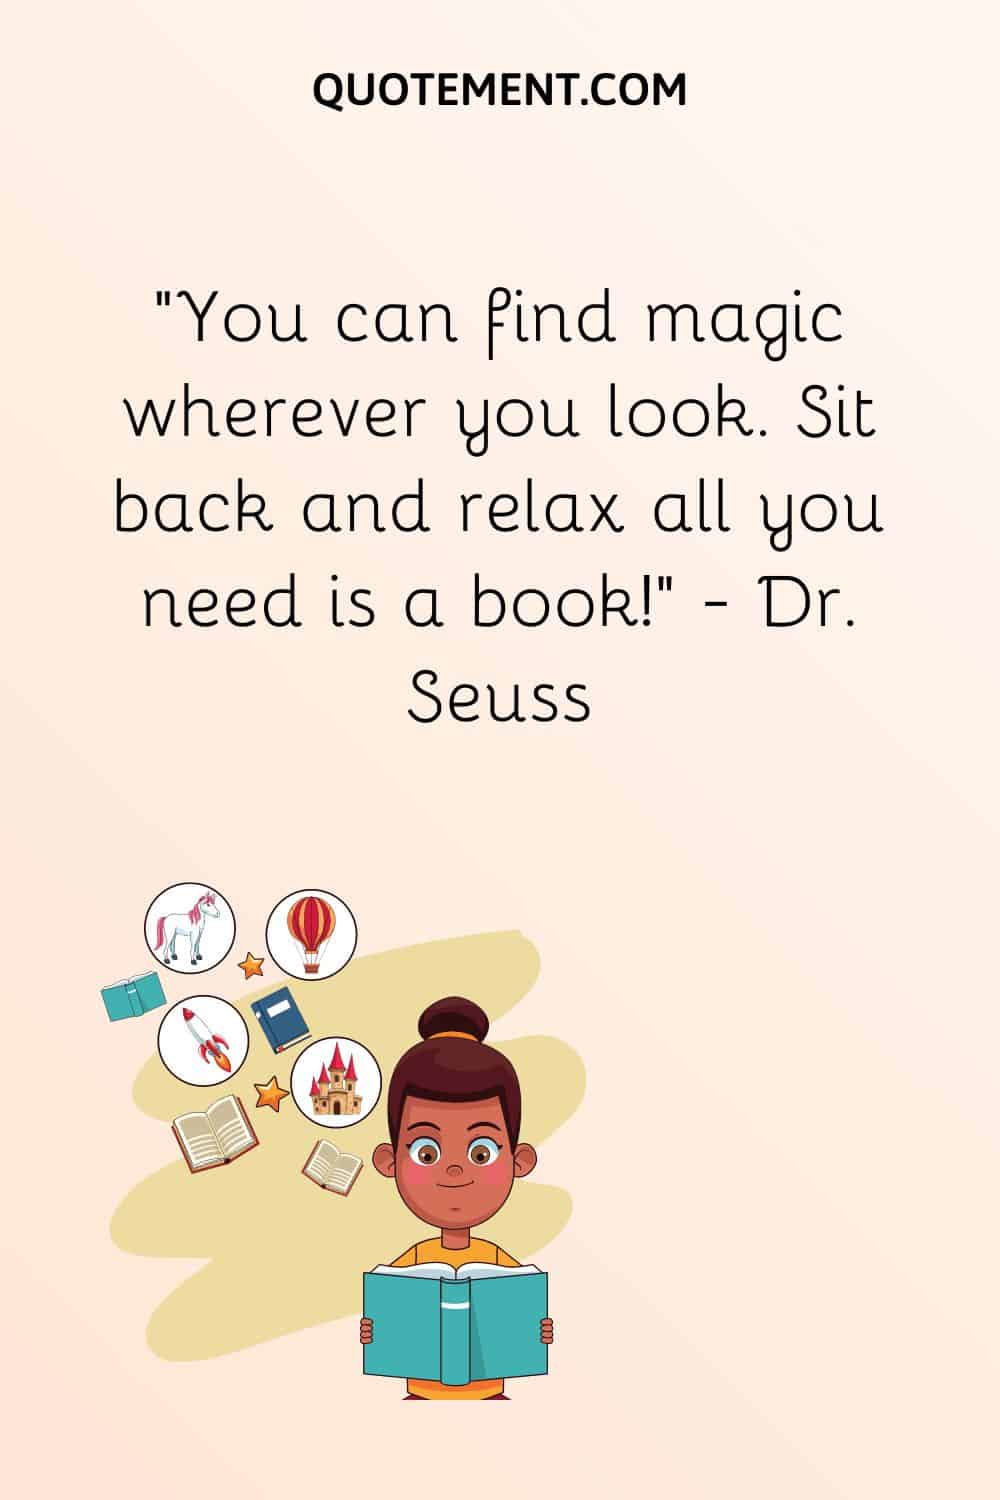 “You can find magic wherever you look. Sit back and relax all you need is a book!” — Dr. Seuss